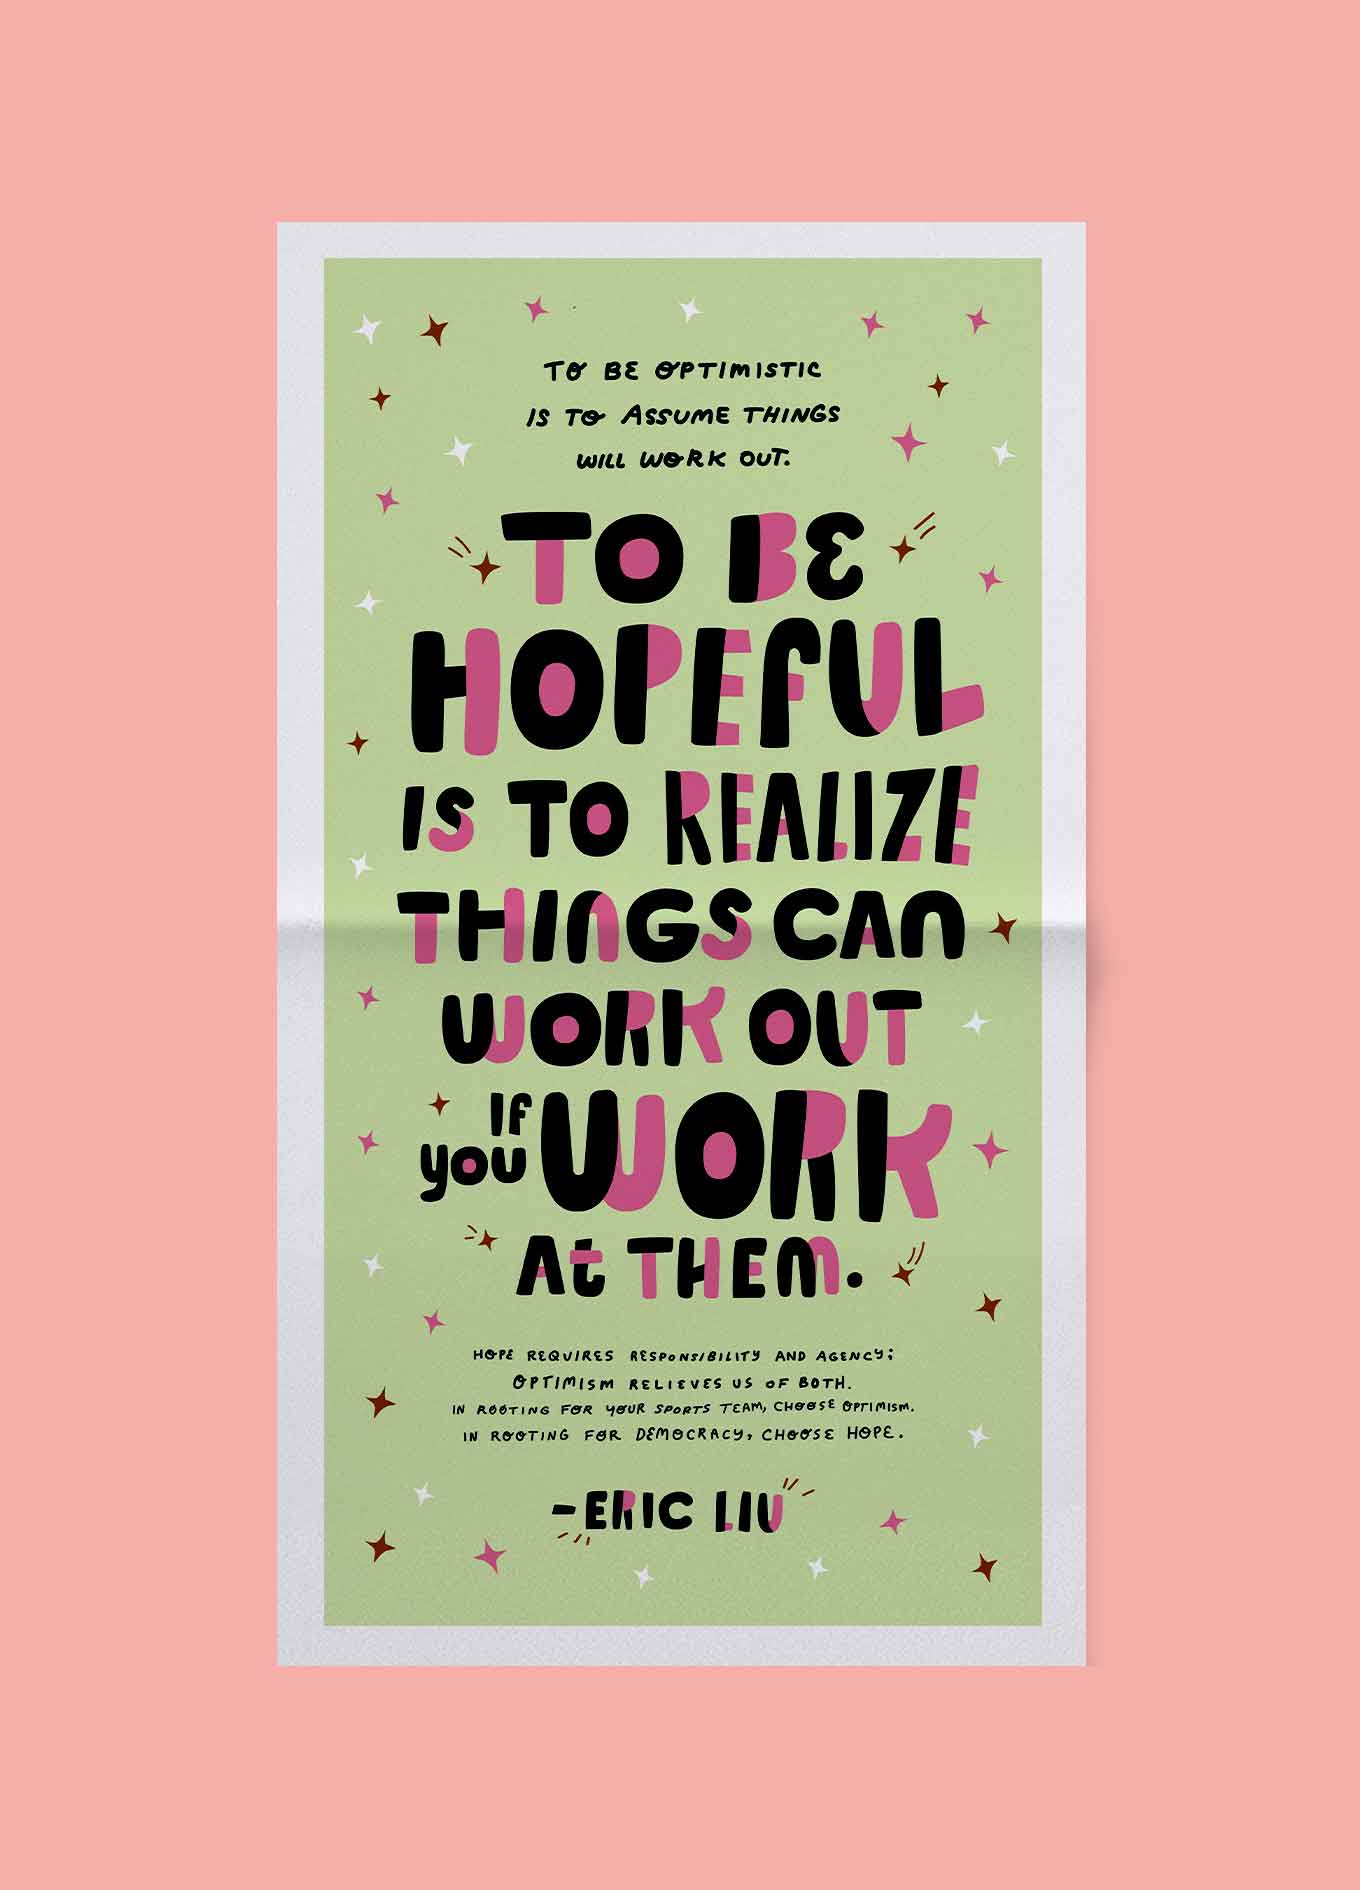 Illustration of quote about hope: To be optimistic is to assume things will work out. To be hopeful is to realize things can work out if you work at them. Hope requires responsibility and agency; optimism relieves us of both. In rooting for your sports team, choose optimism. In rooting for democracy, choose hope. — Eric Liu